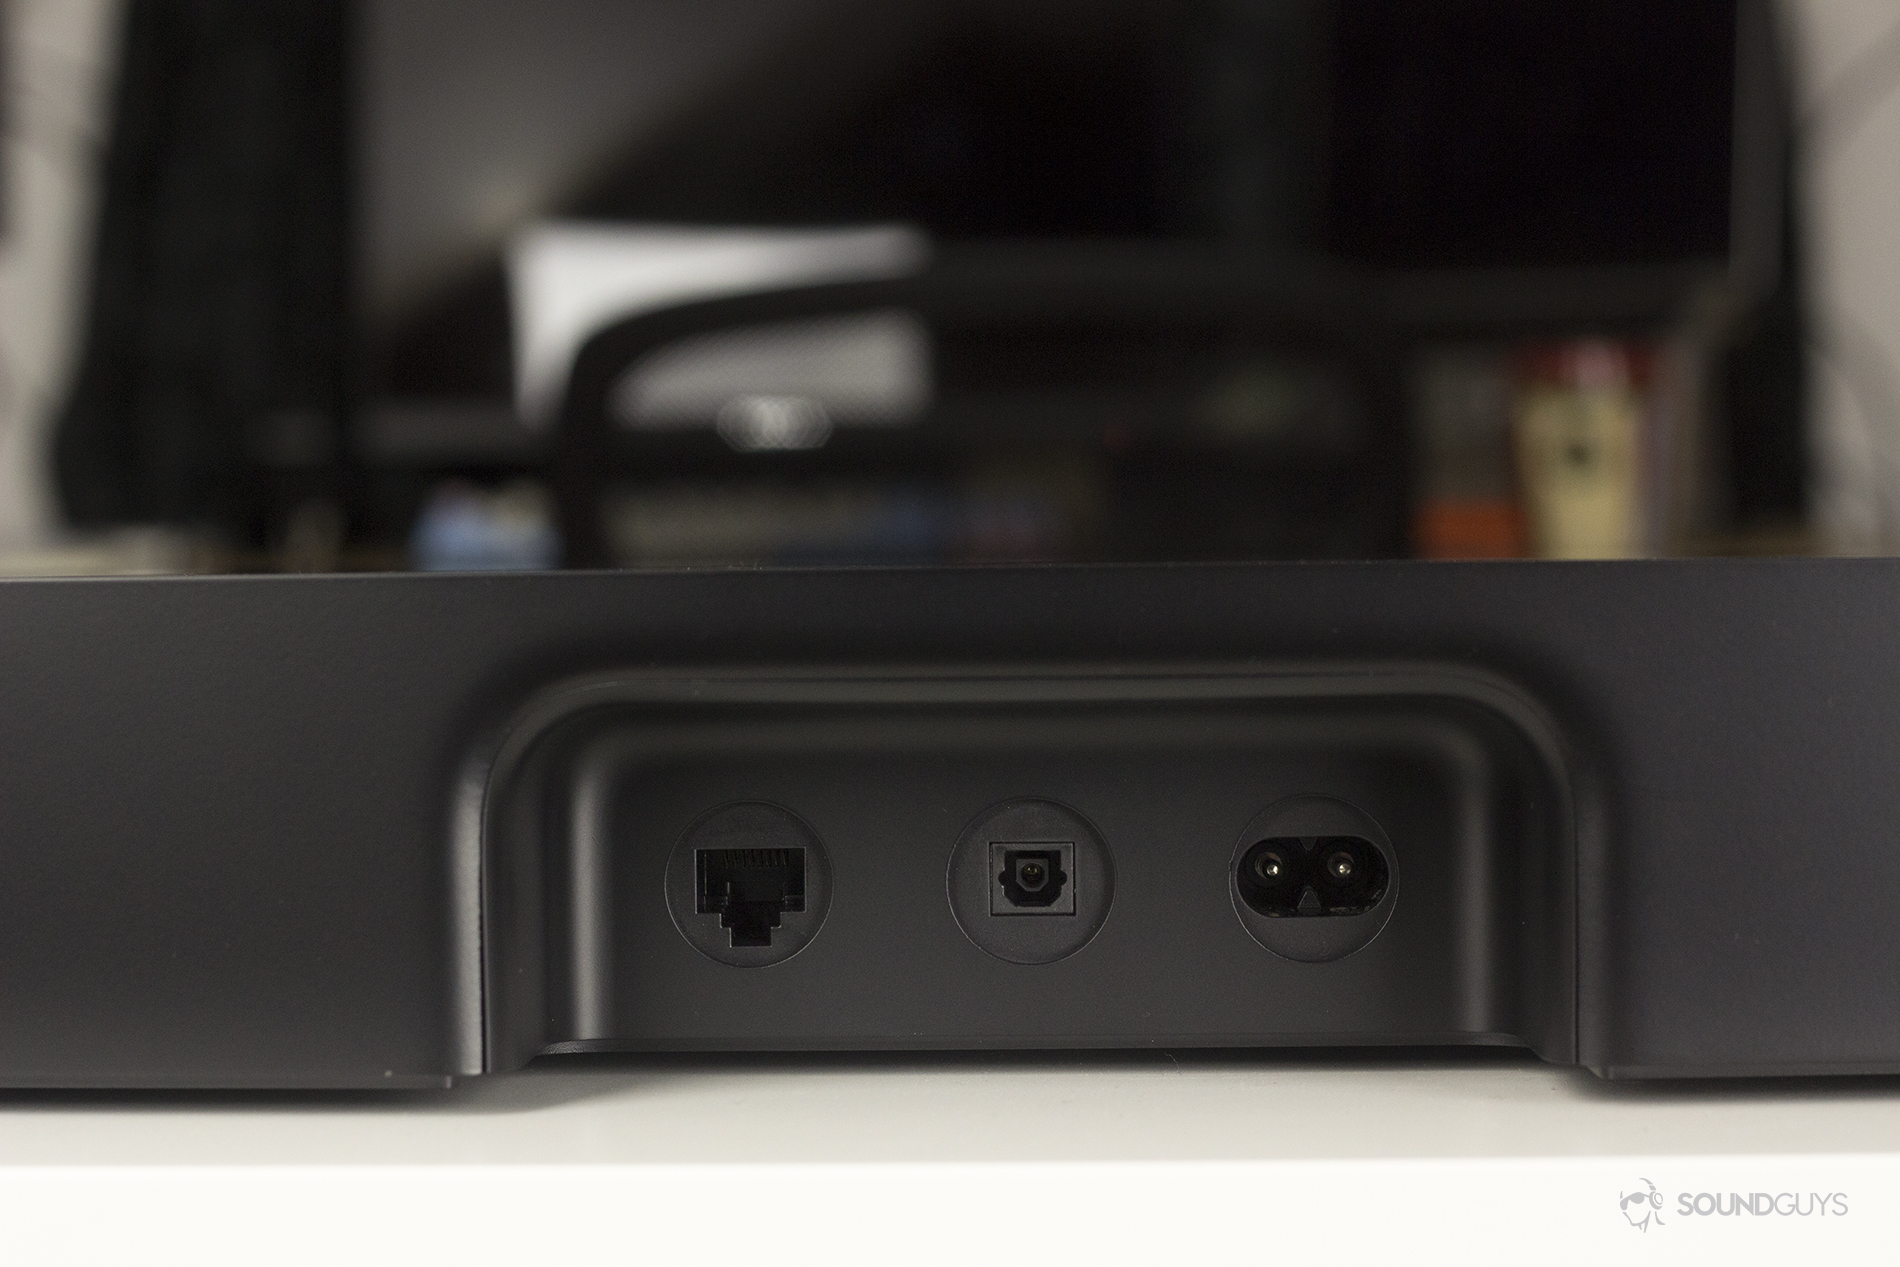 Close-up of the back of the Sonos Playbase.